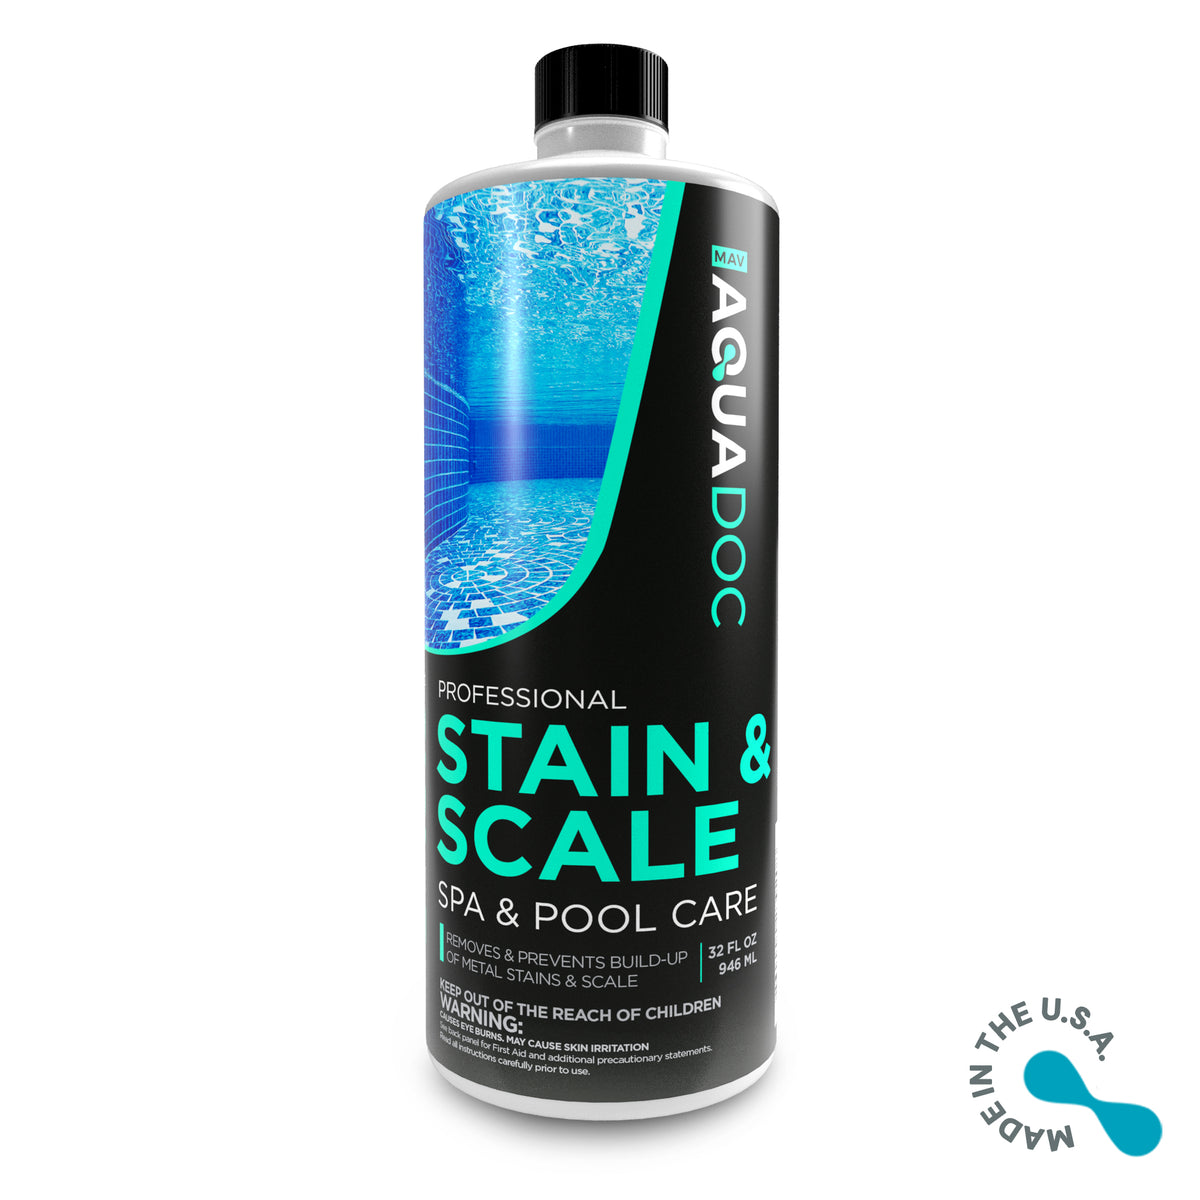 Eliminate Stains and Scale with AquaDoc's Spa Stain and Scale Treatment